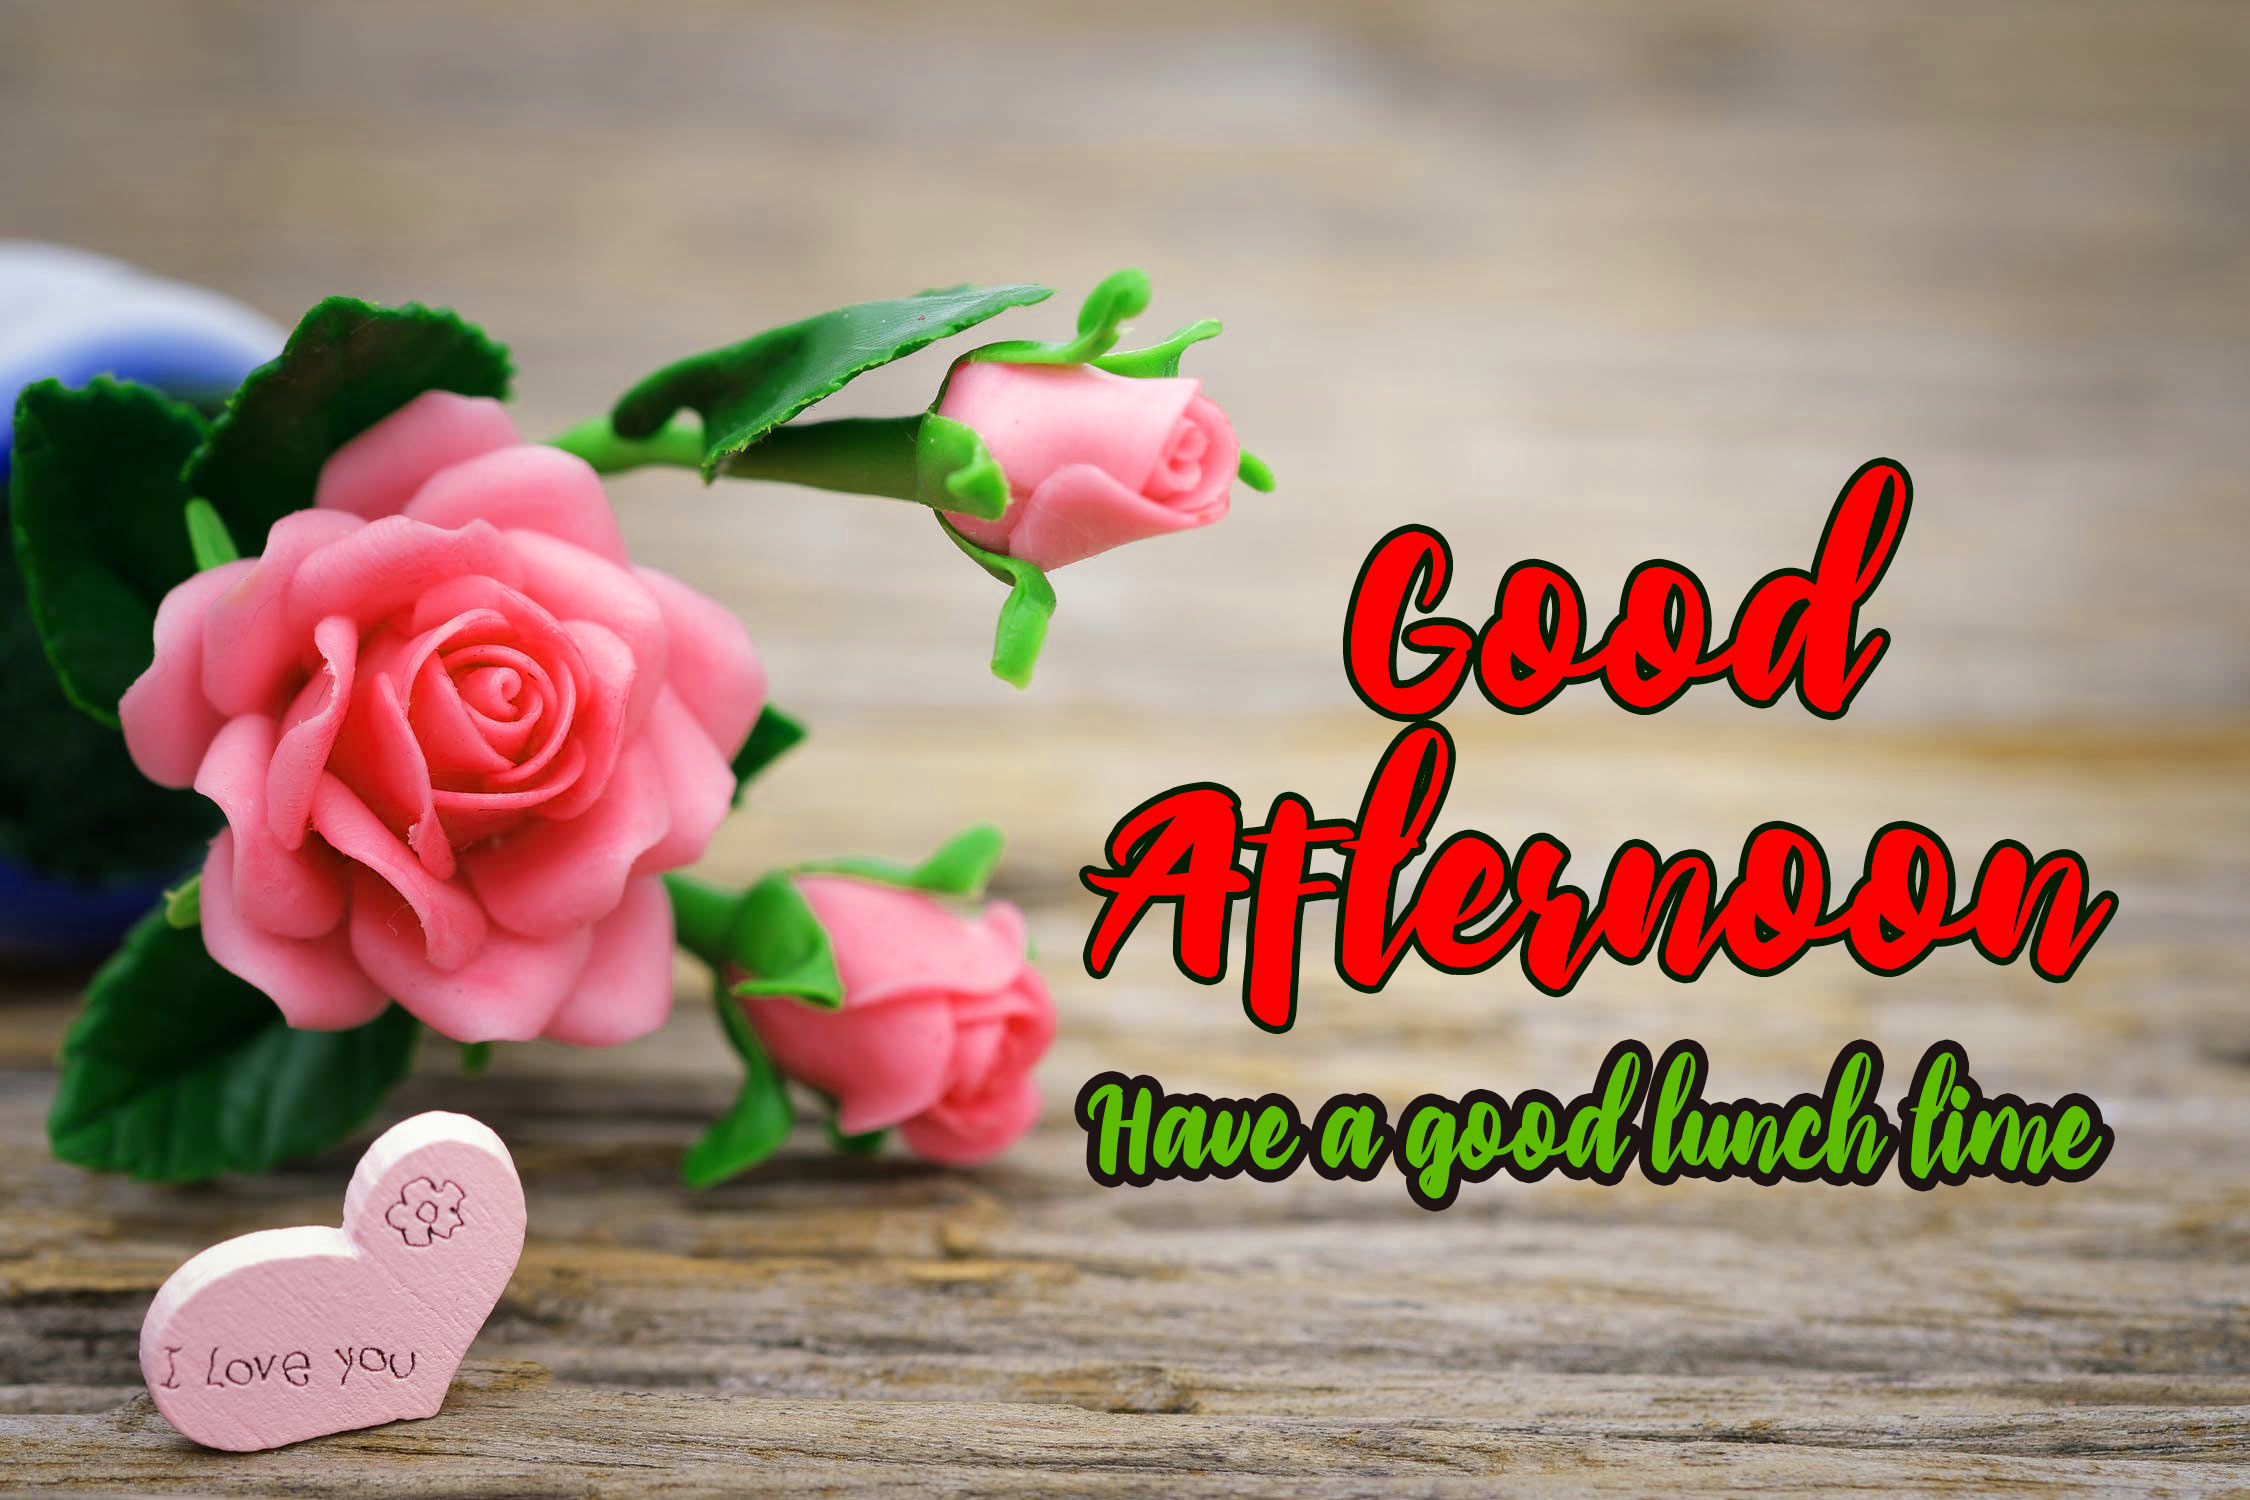 Good Afternoon Images Wallpaper Pics Free  - Sweet Good Night Hubby - HD Wallpaper 